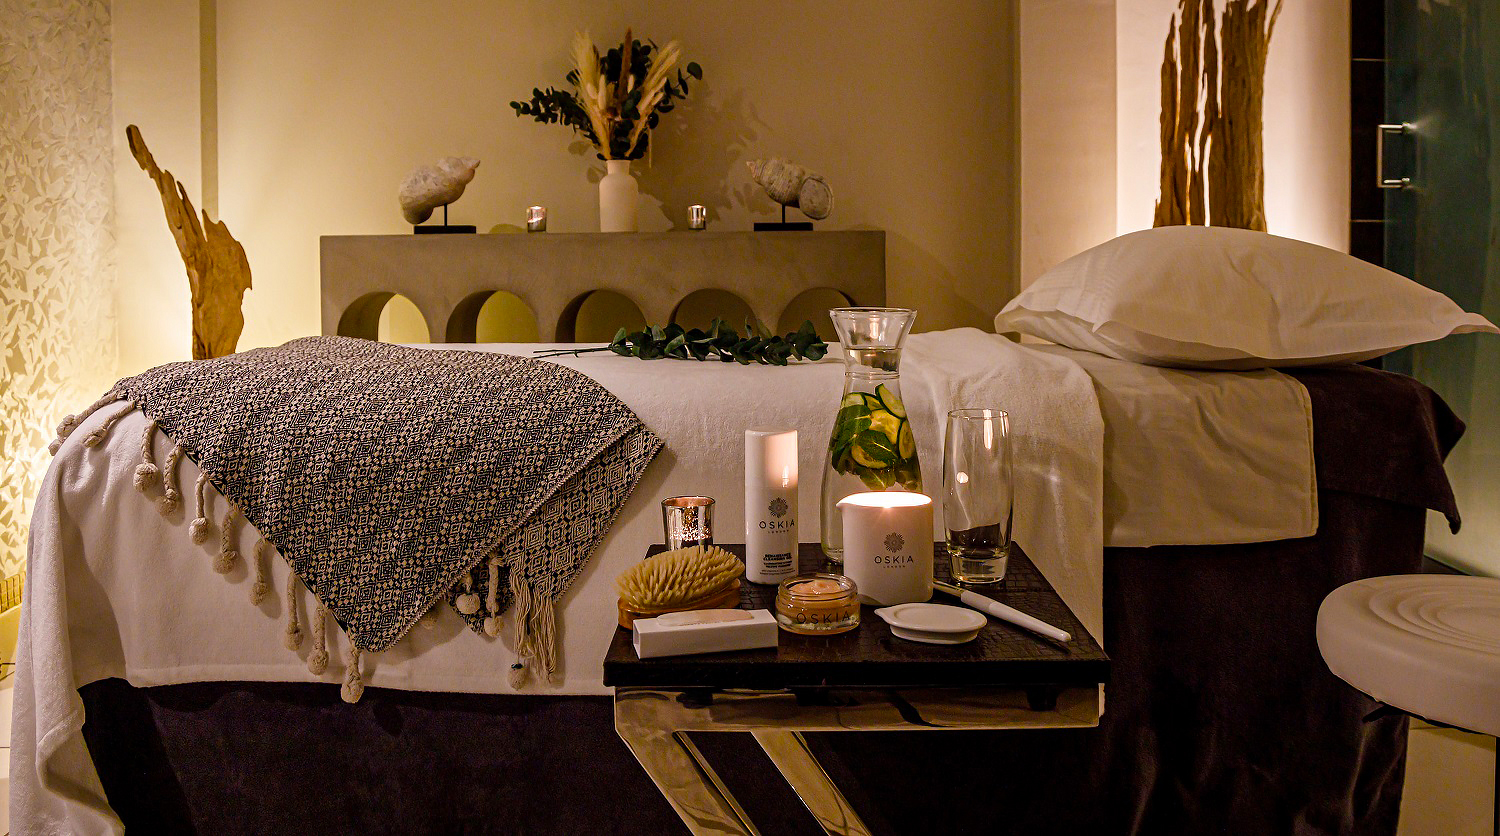 2 Night Escape With Treatments, Alexander House Hotel And Utopia Spa